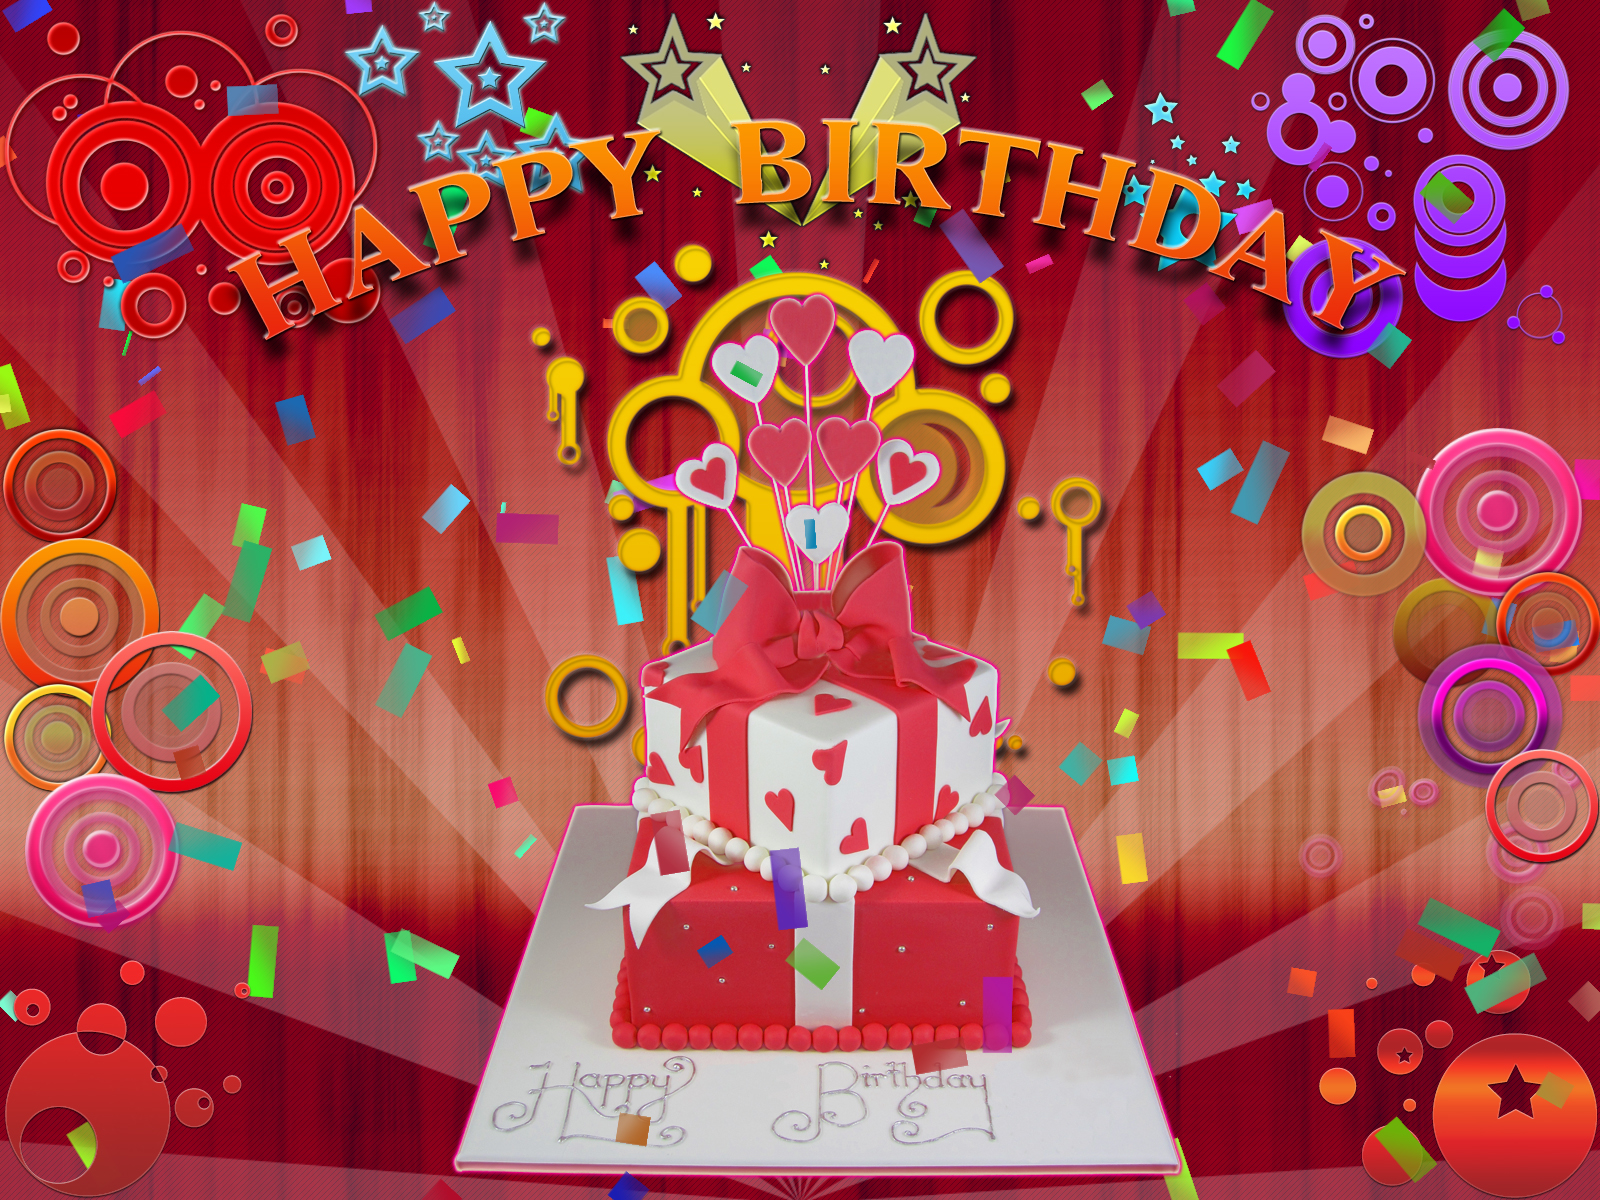 Description Happy Birthday Wallpapers is a hi res Wallpaper for pc